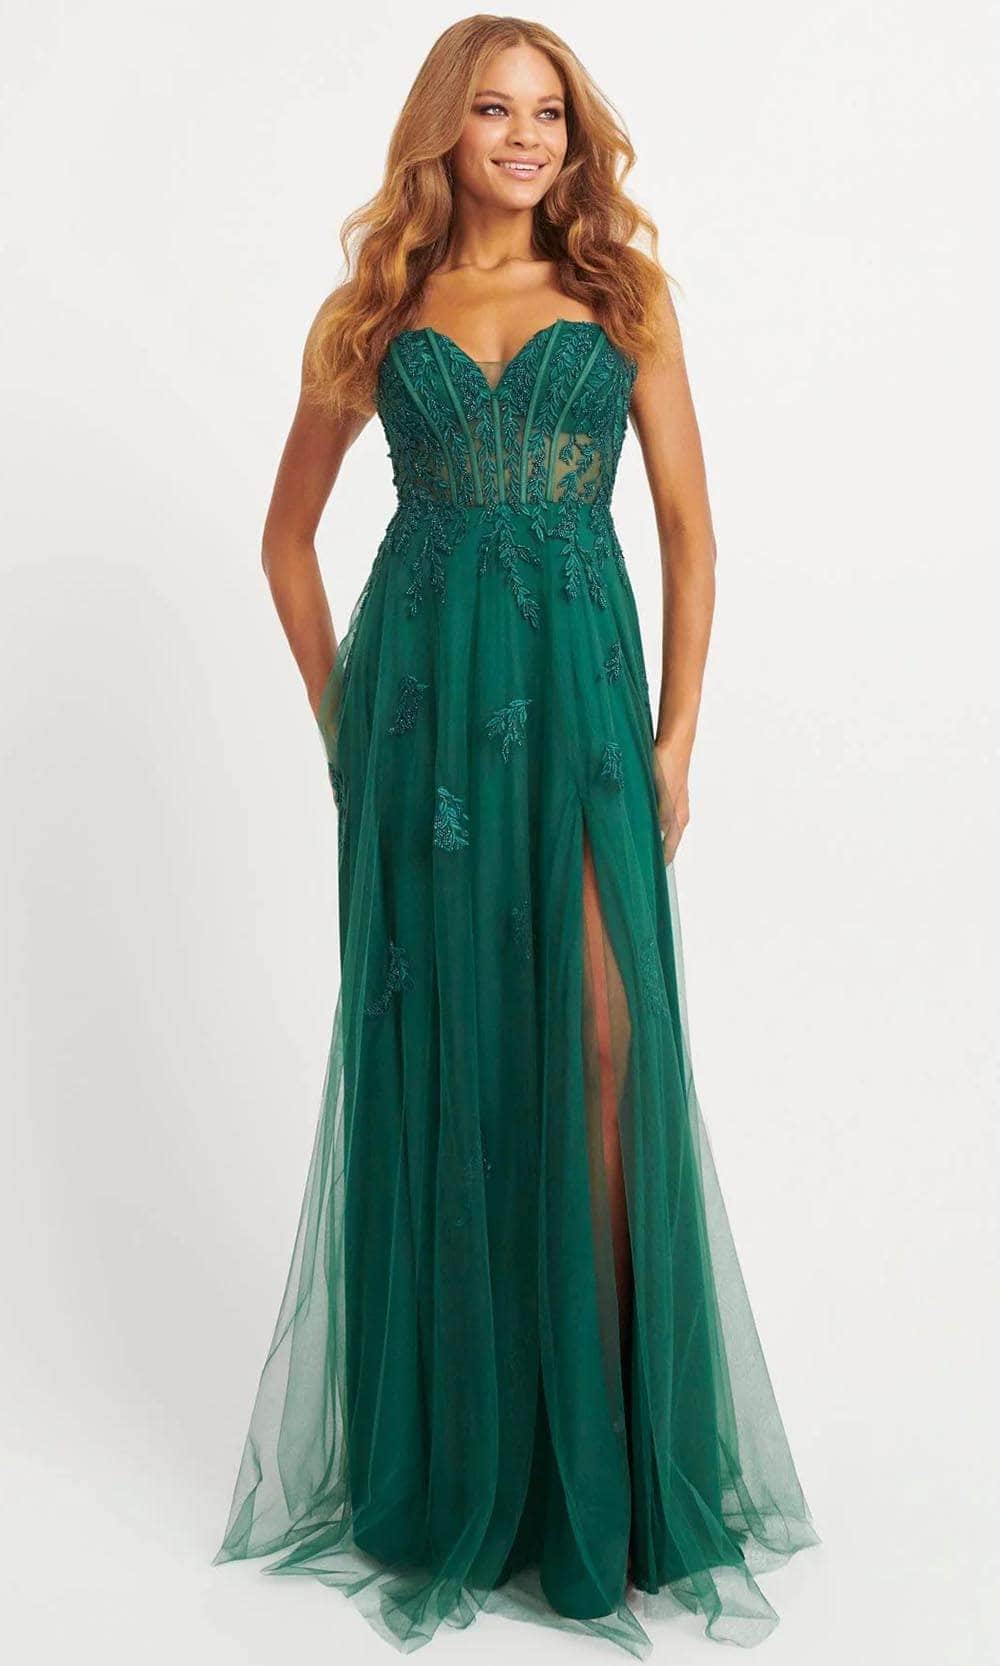 Image of Faviana 11057 - Tulle A-Line Prom Gown